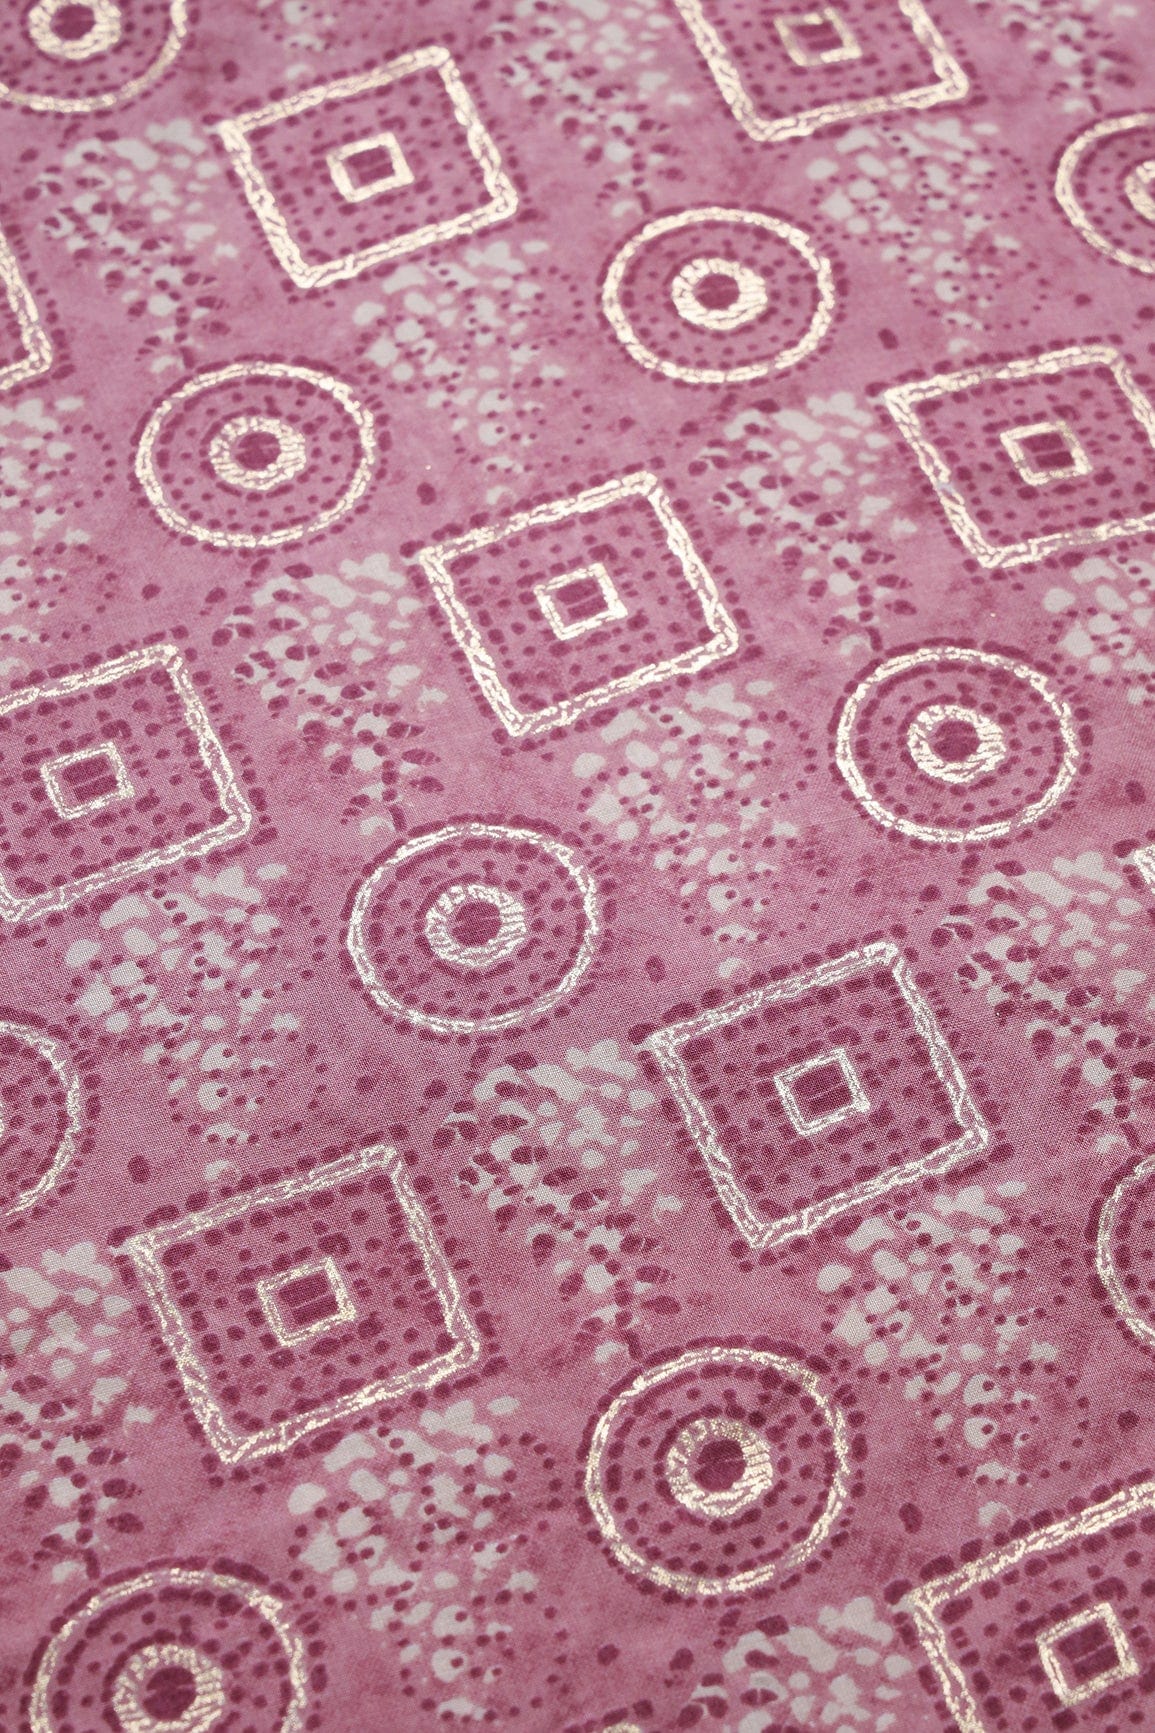 doeraa Prints Lavender Pink And Cream Geometric Foil Print On Pure Rayon Fabric